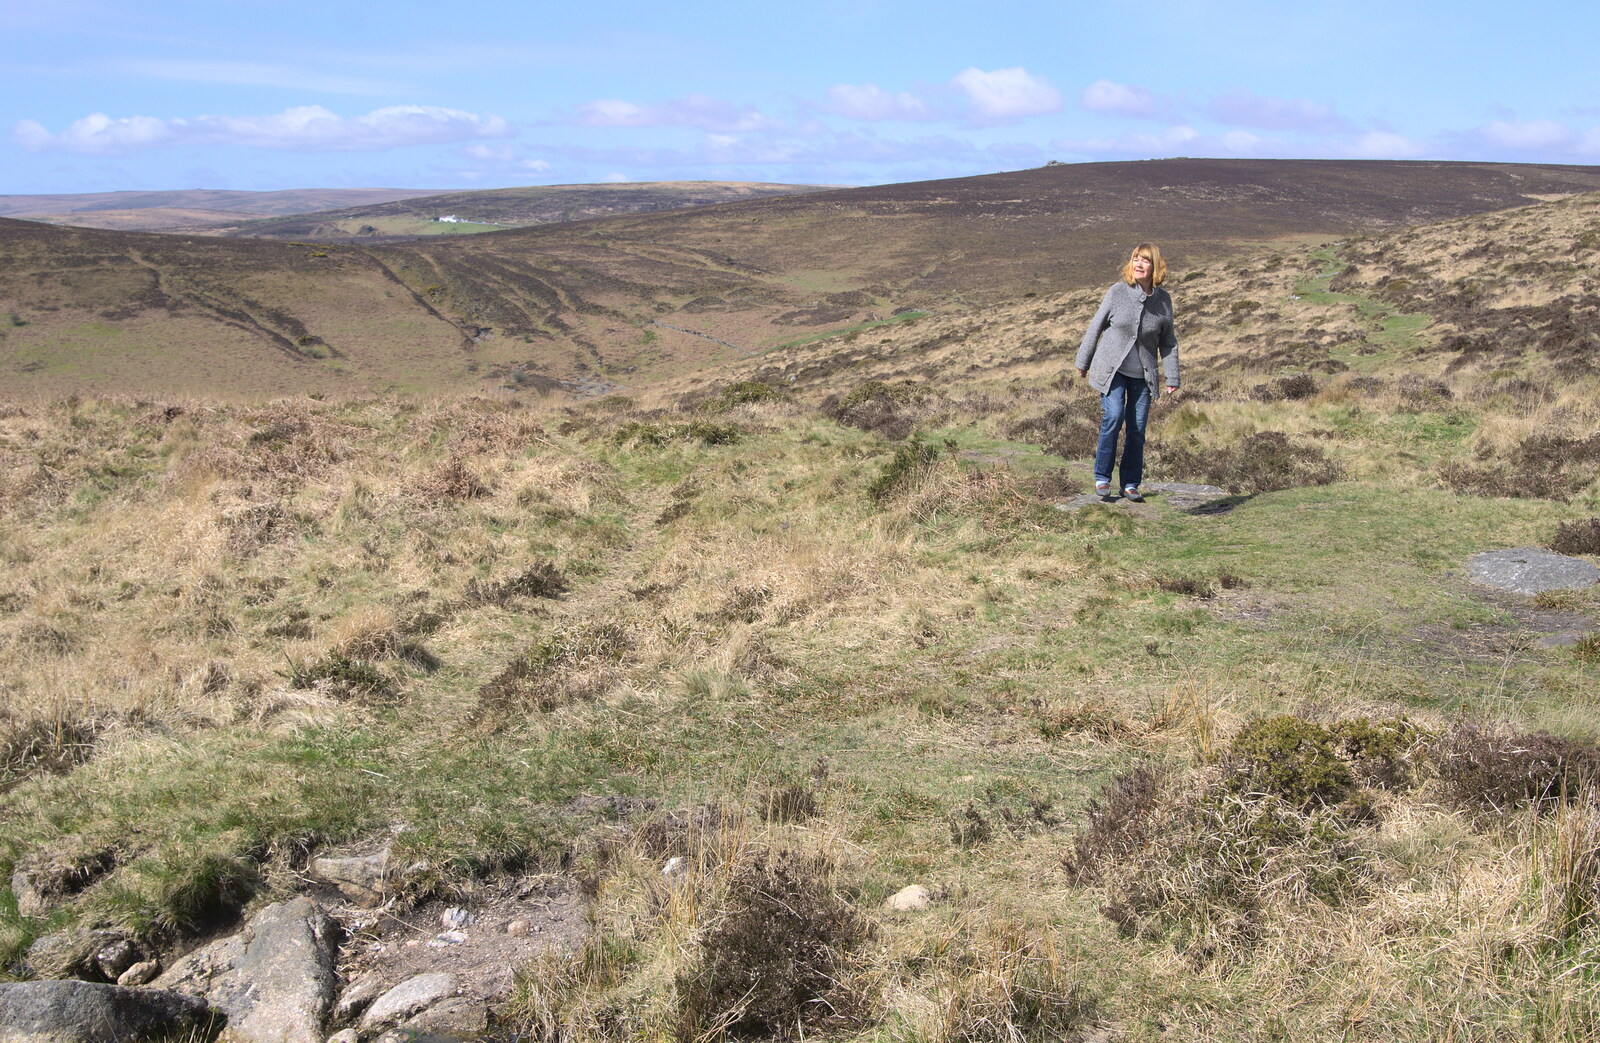 Mother climbs up from A Barbeque, Grimspound and Pizza, Dartmoor and Exeter, Devon - 15th April 2017